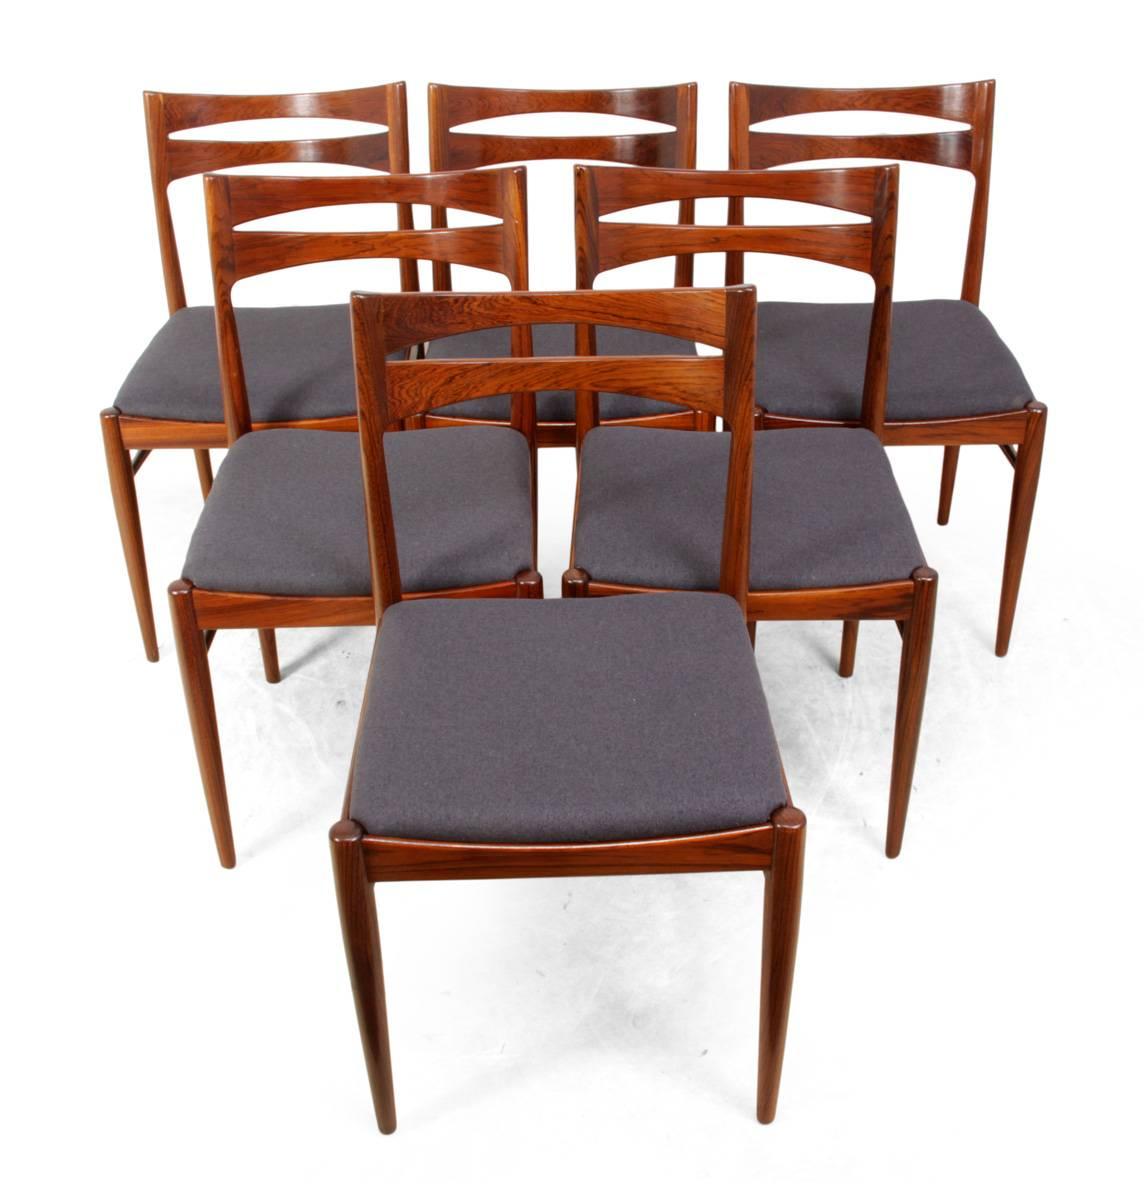 Midcentury Danish dining chairs set of six
This set of figured solid rosewood dining chairs have been fully polished and upholstered in grey 100% wool. All the joints are solid and have had no history of breaks, they were produced in Denmark in the